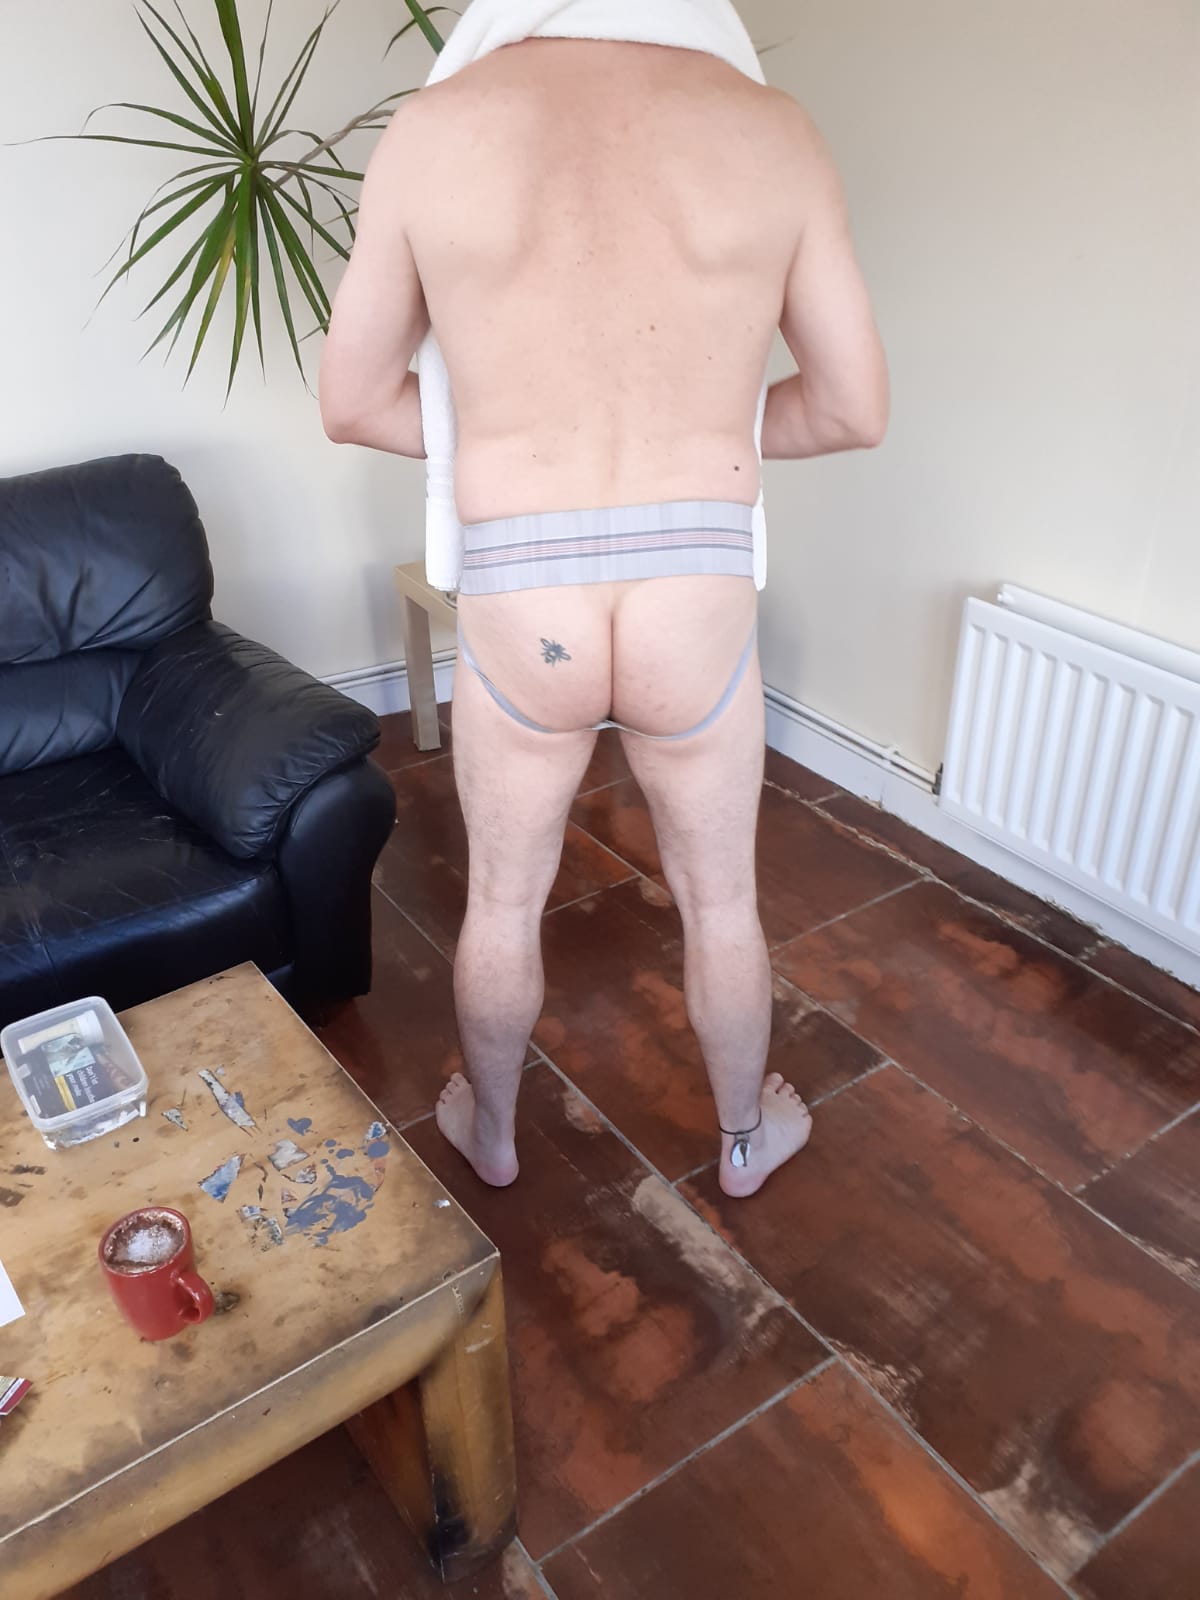 Rear view of the cum and piss stained grey GYM jockstrap before I enter the sling room of the sauna/bath house.